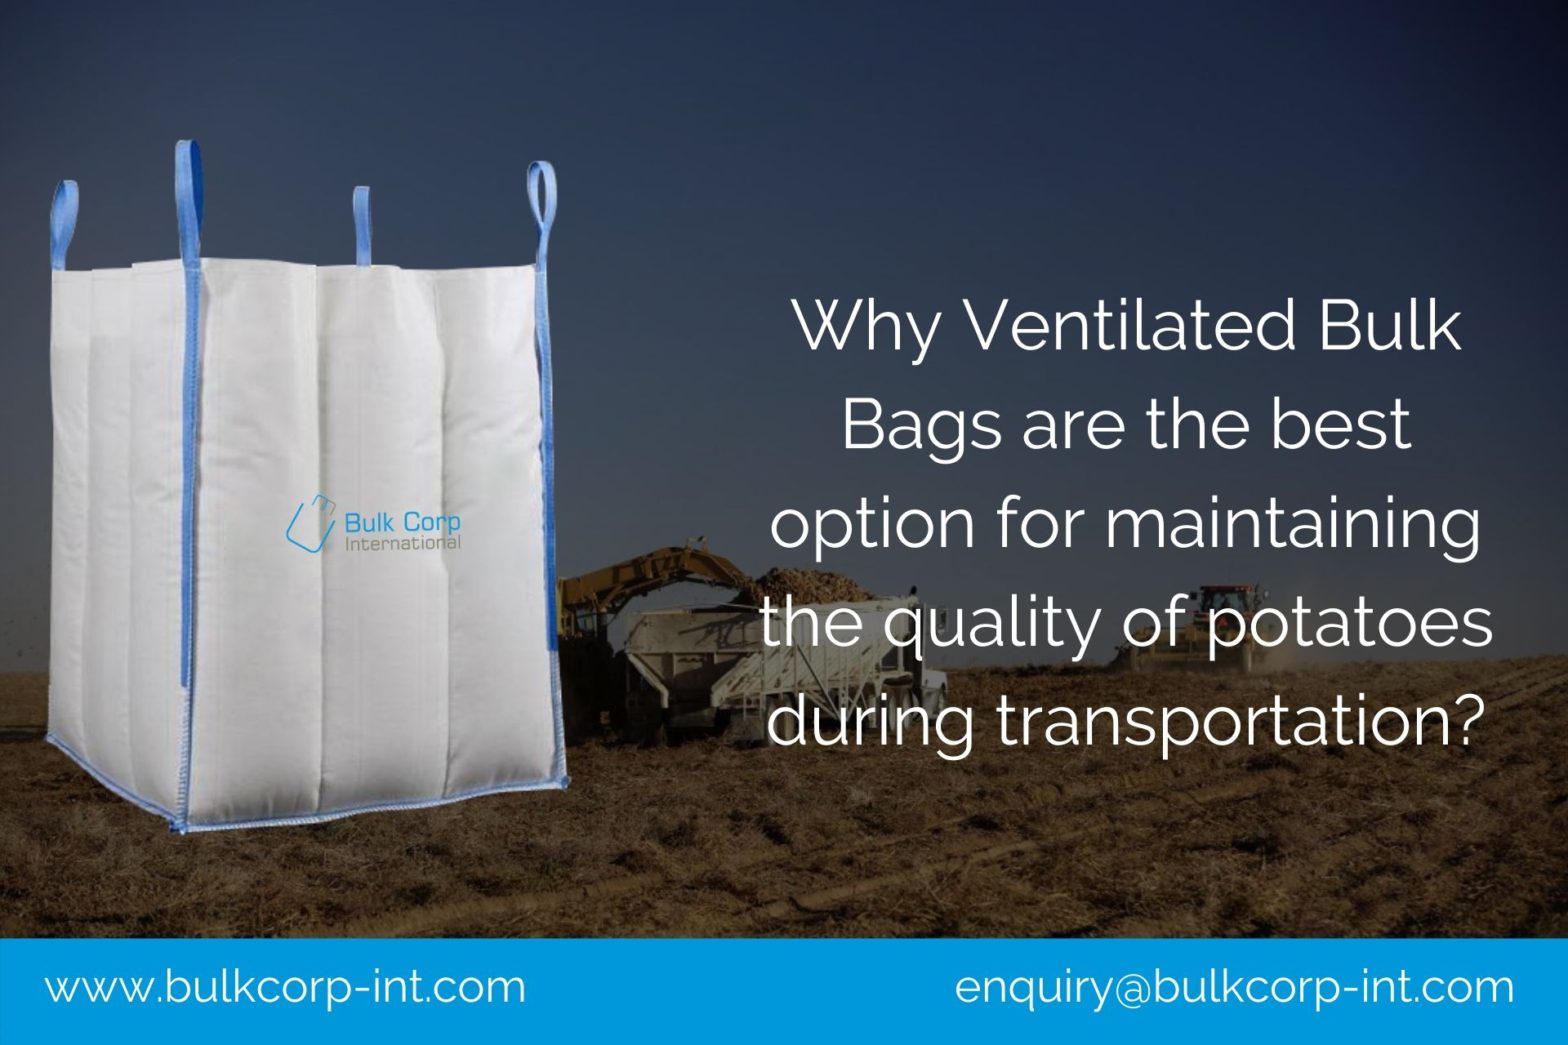 Why Ventilated Bulk Bags are the best option for maintaining the quality of potatoes during transportation?